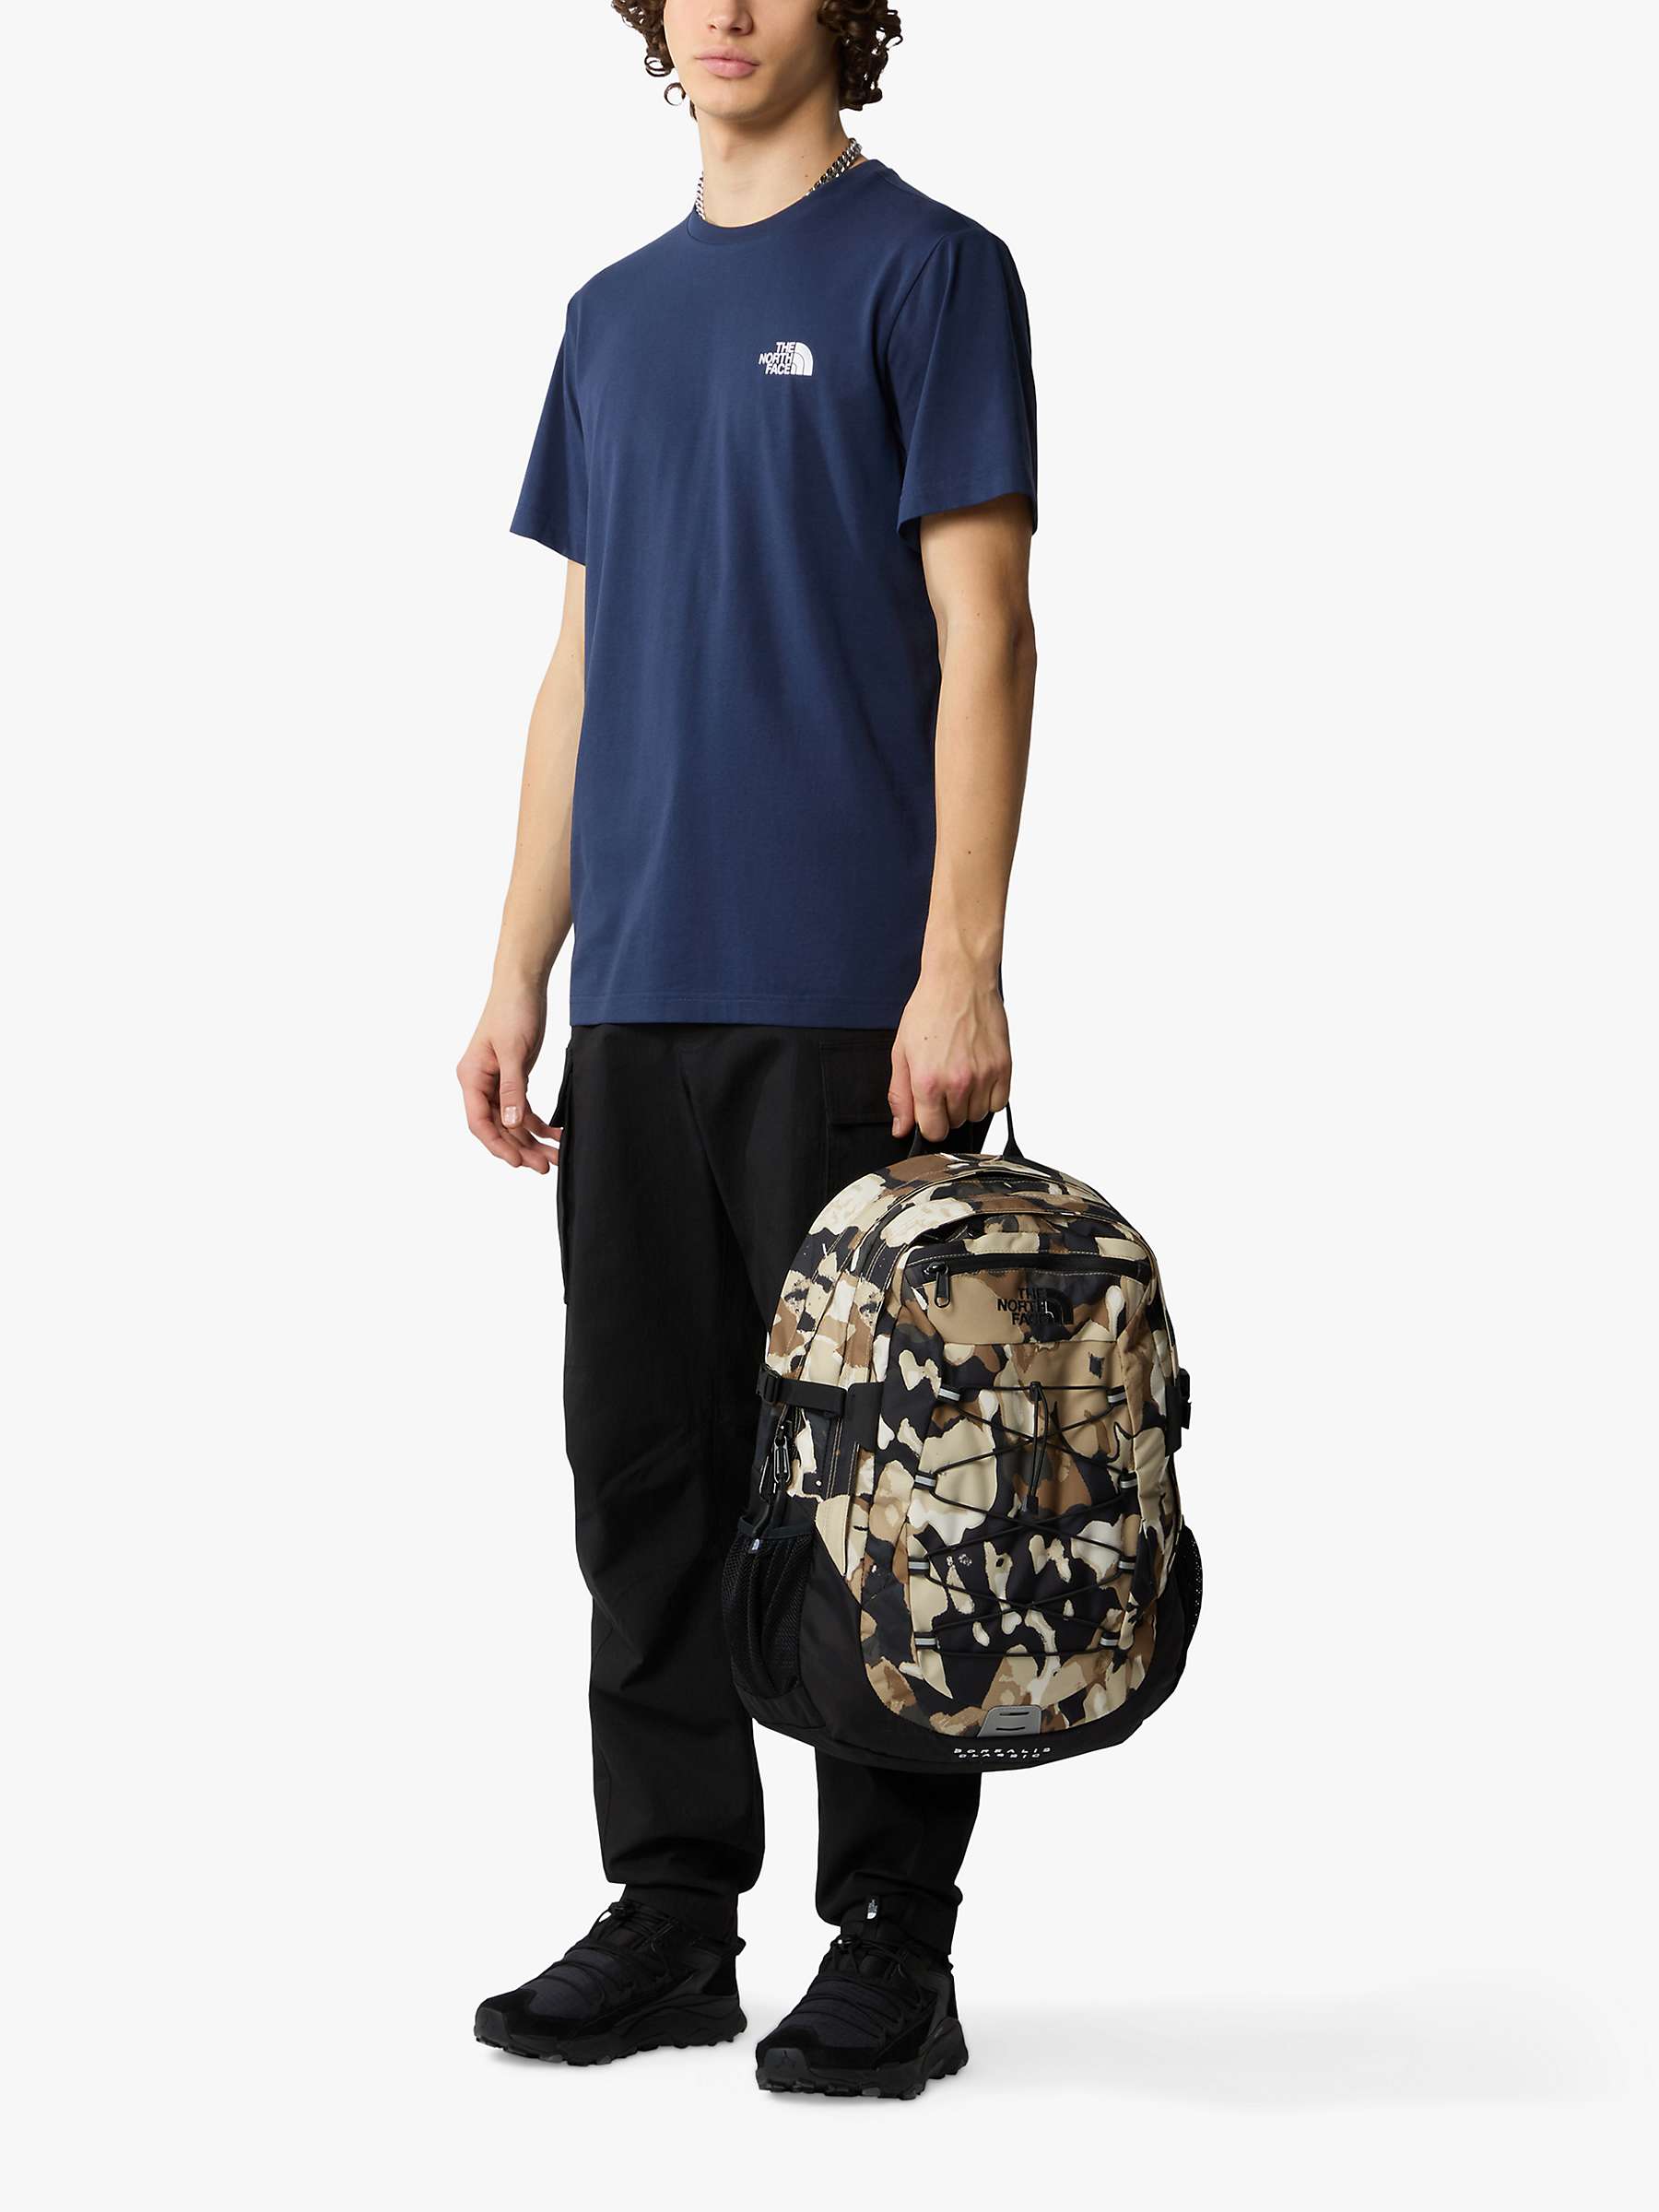 Buy The North Face Short Sleeve Dome T-Shirt, Navy Online at johnlewis.com